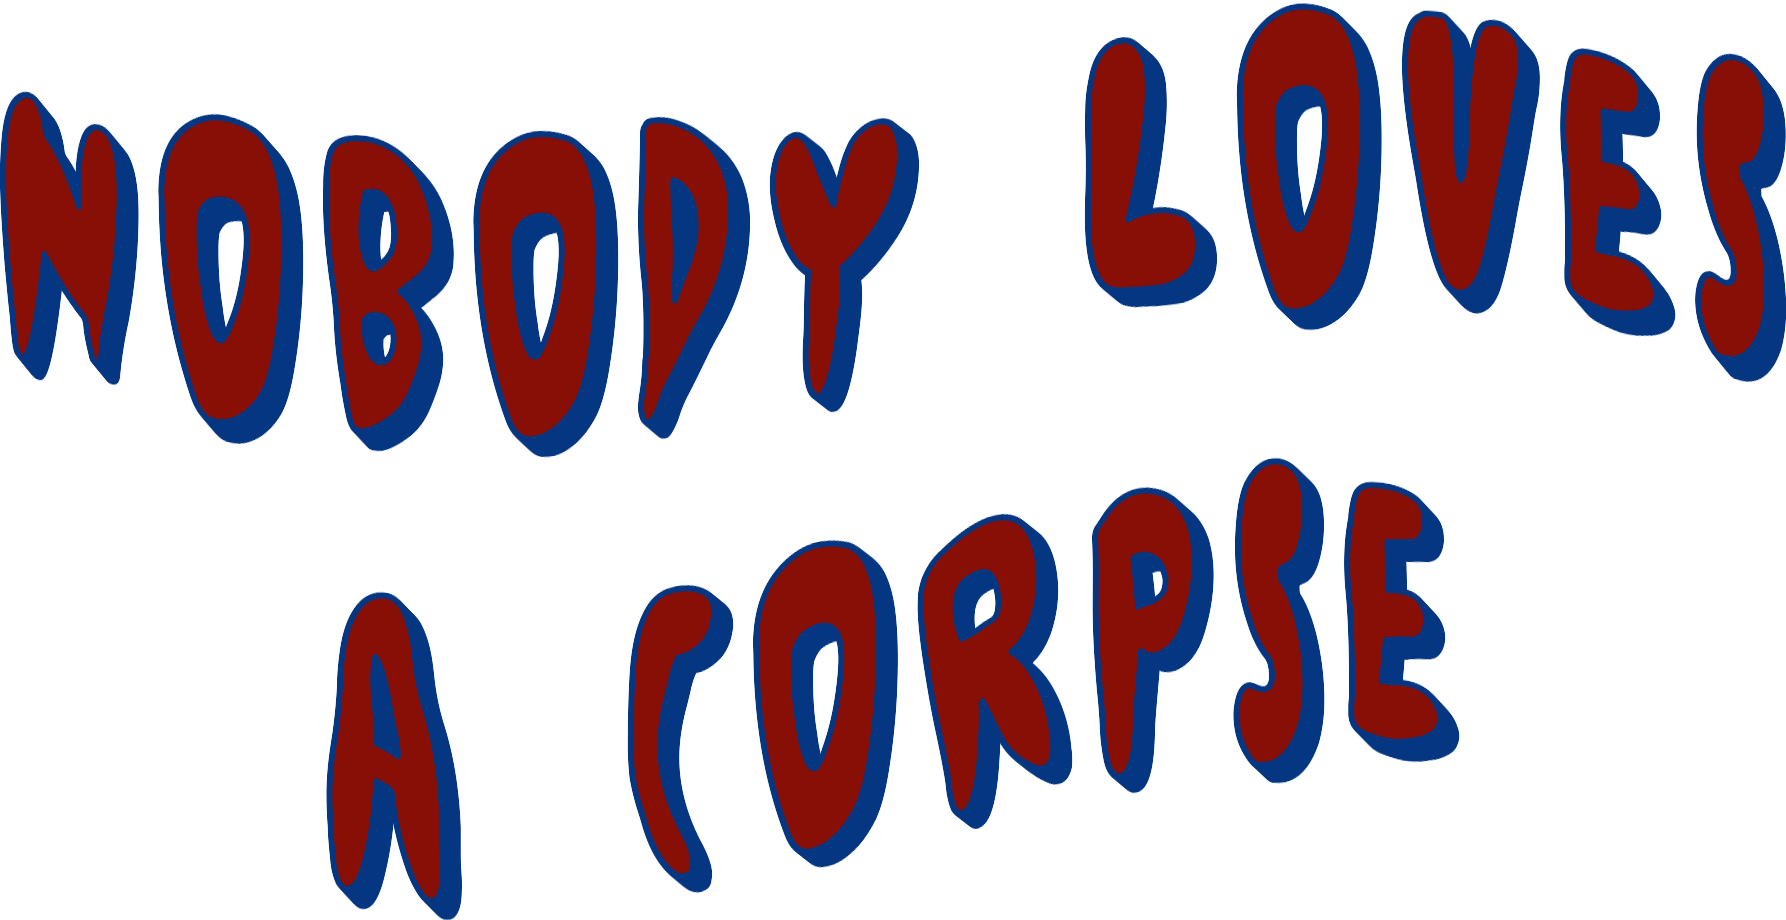 Nobody Loves a Corpse